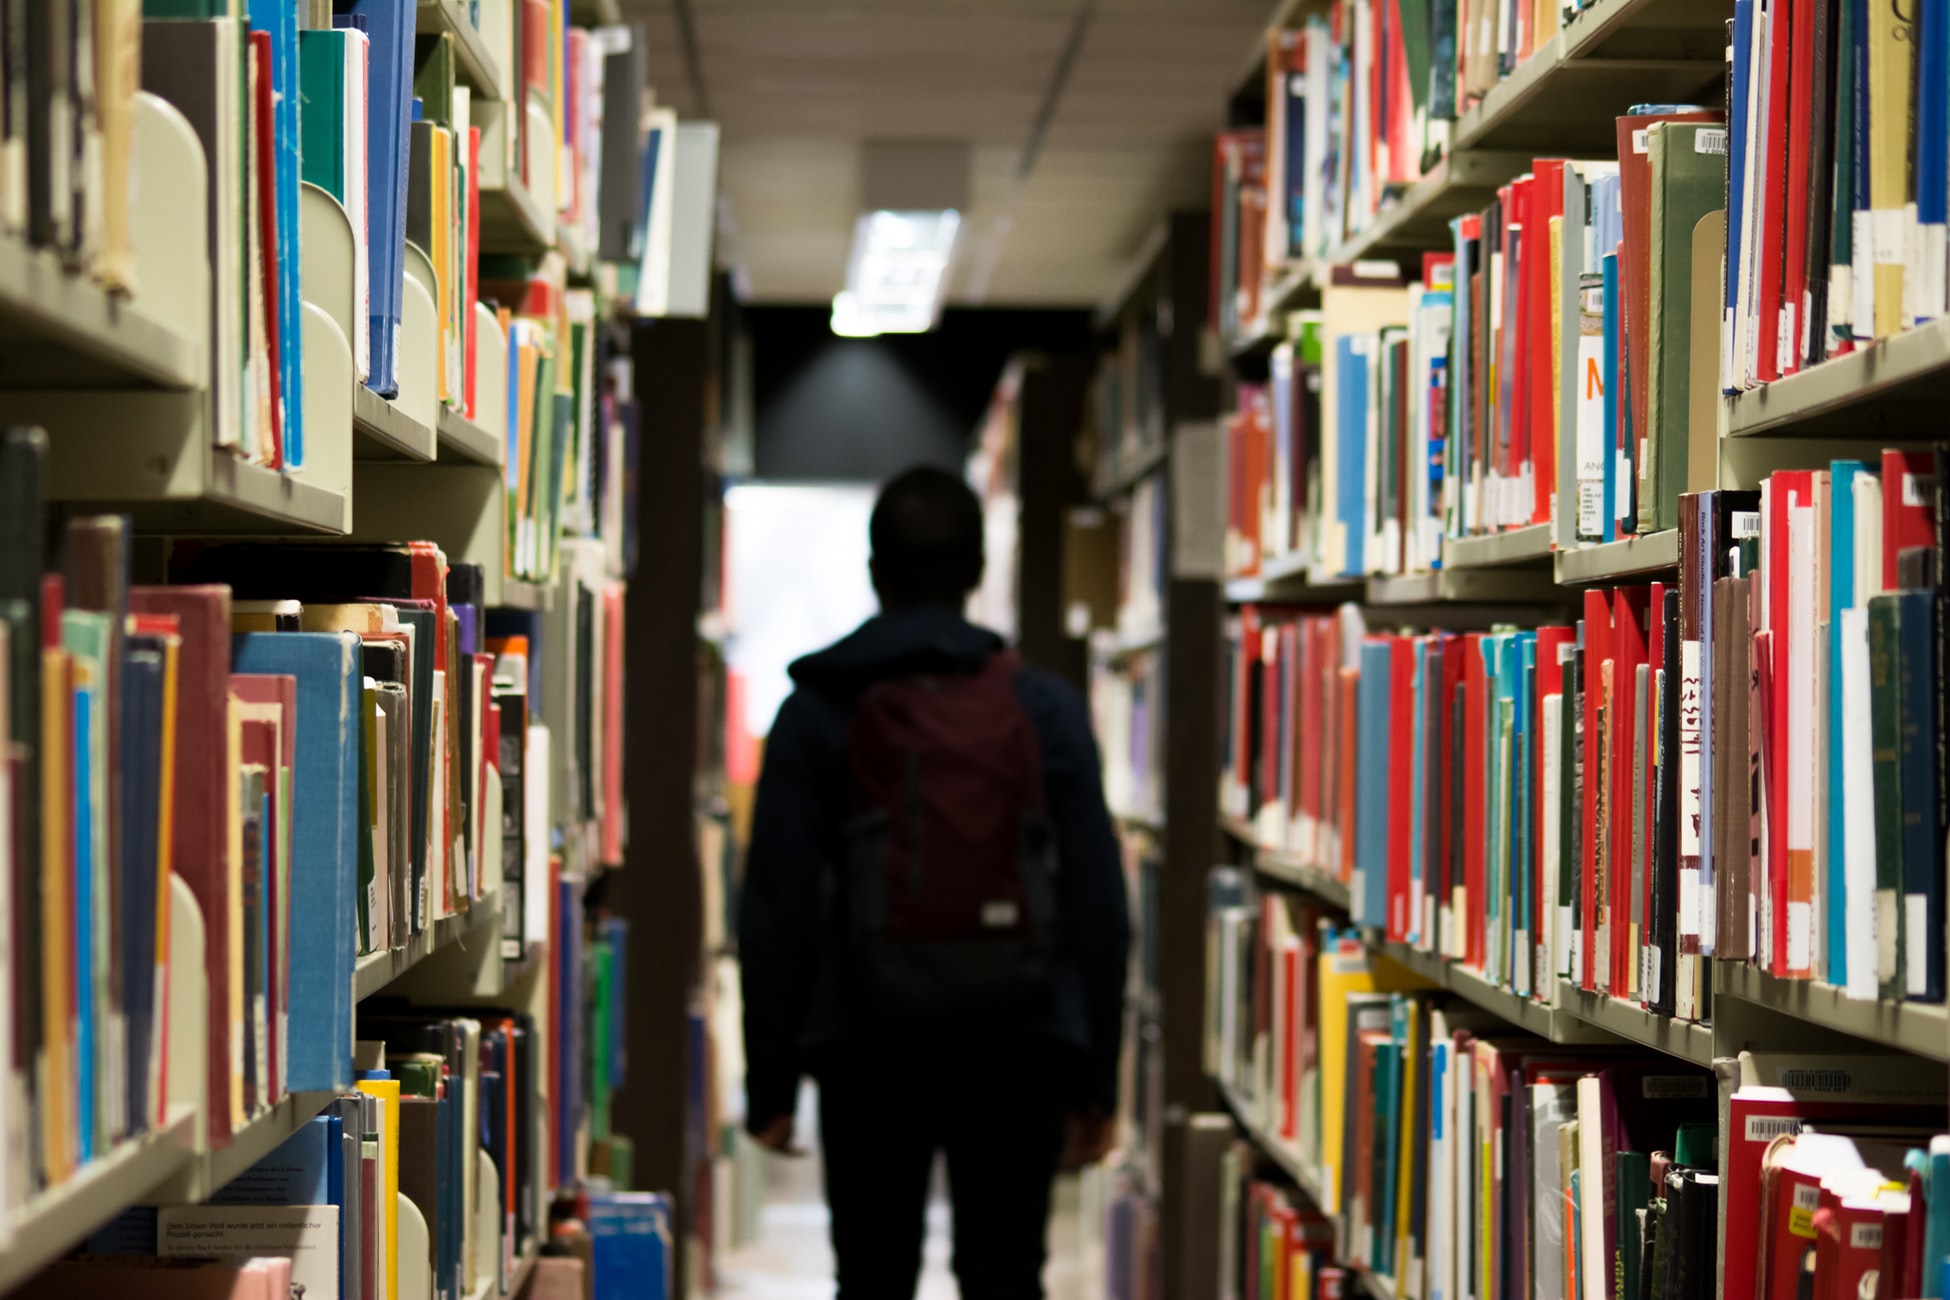 The silhouette of a young adult male walking between two shelves of books